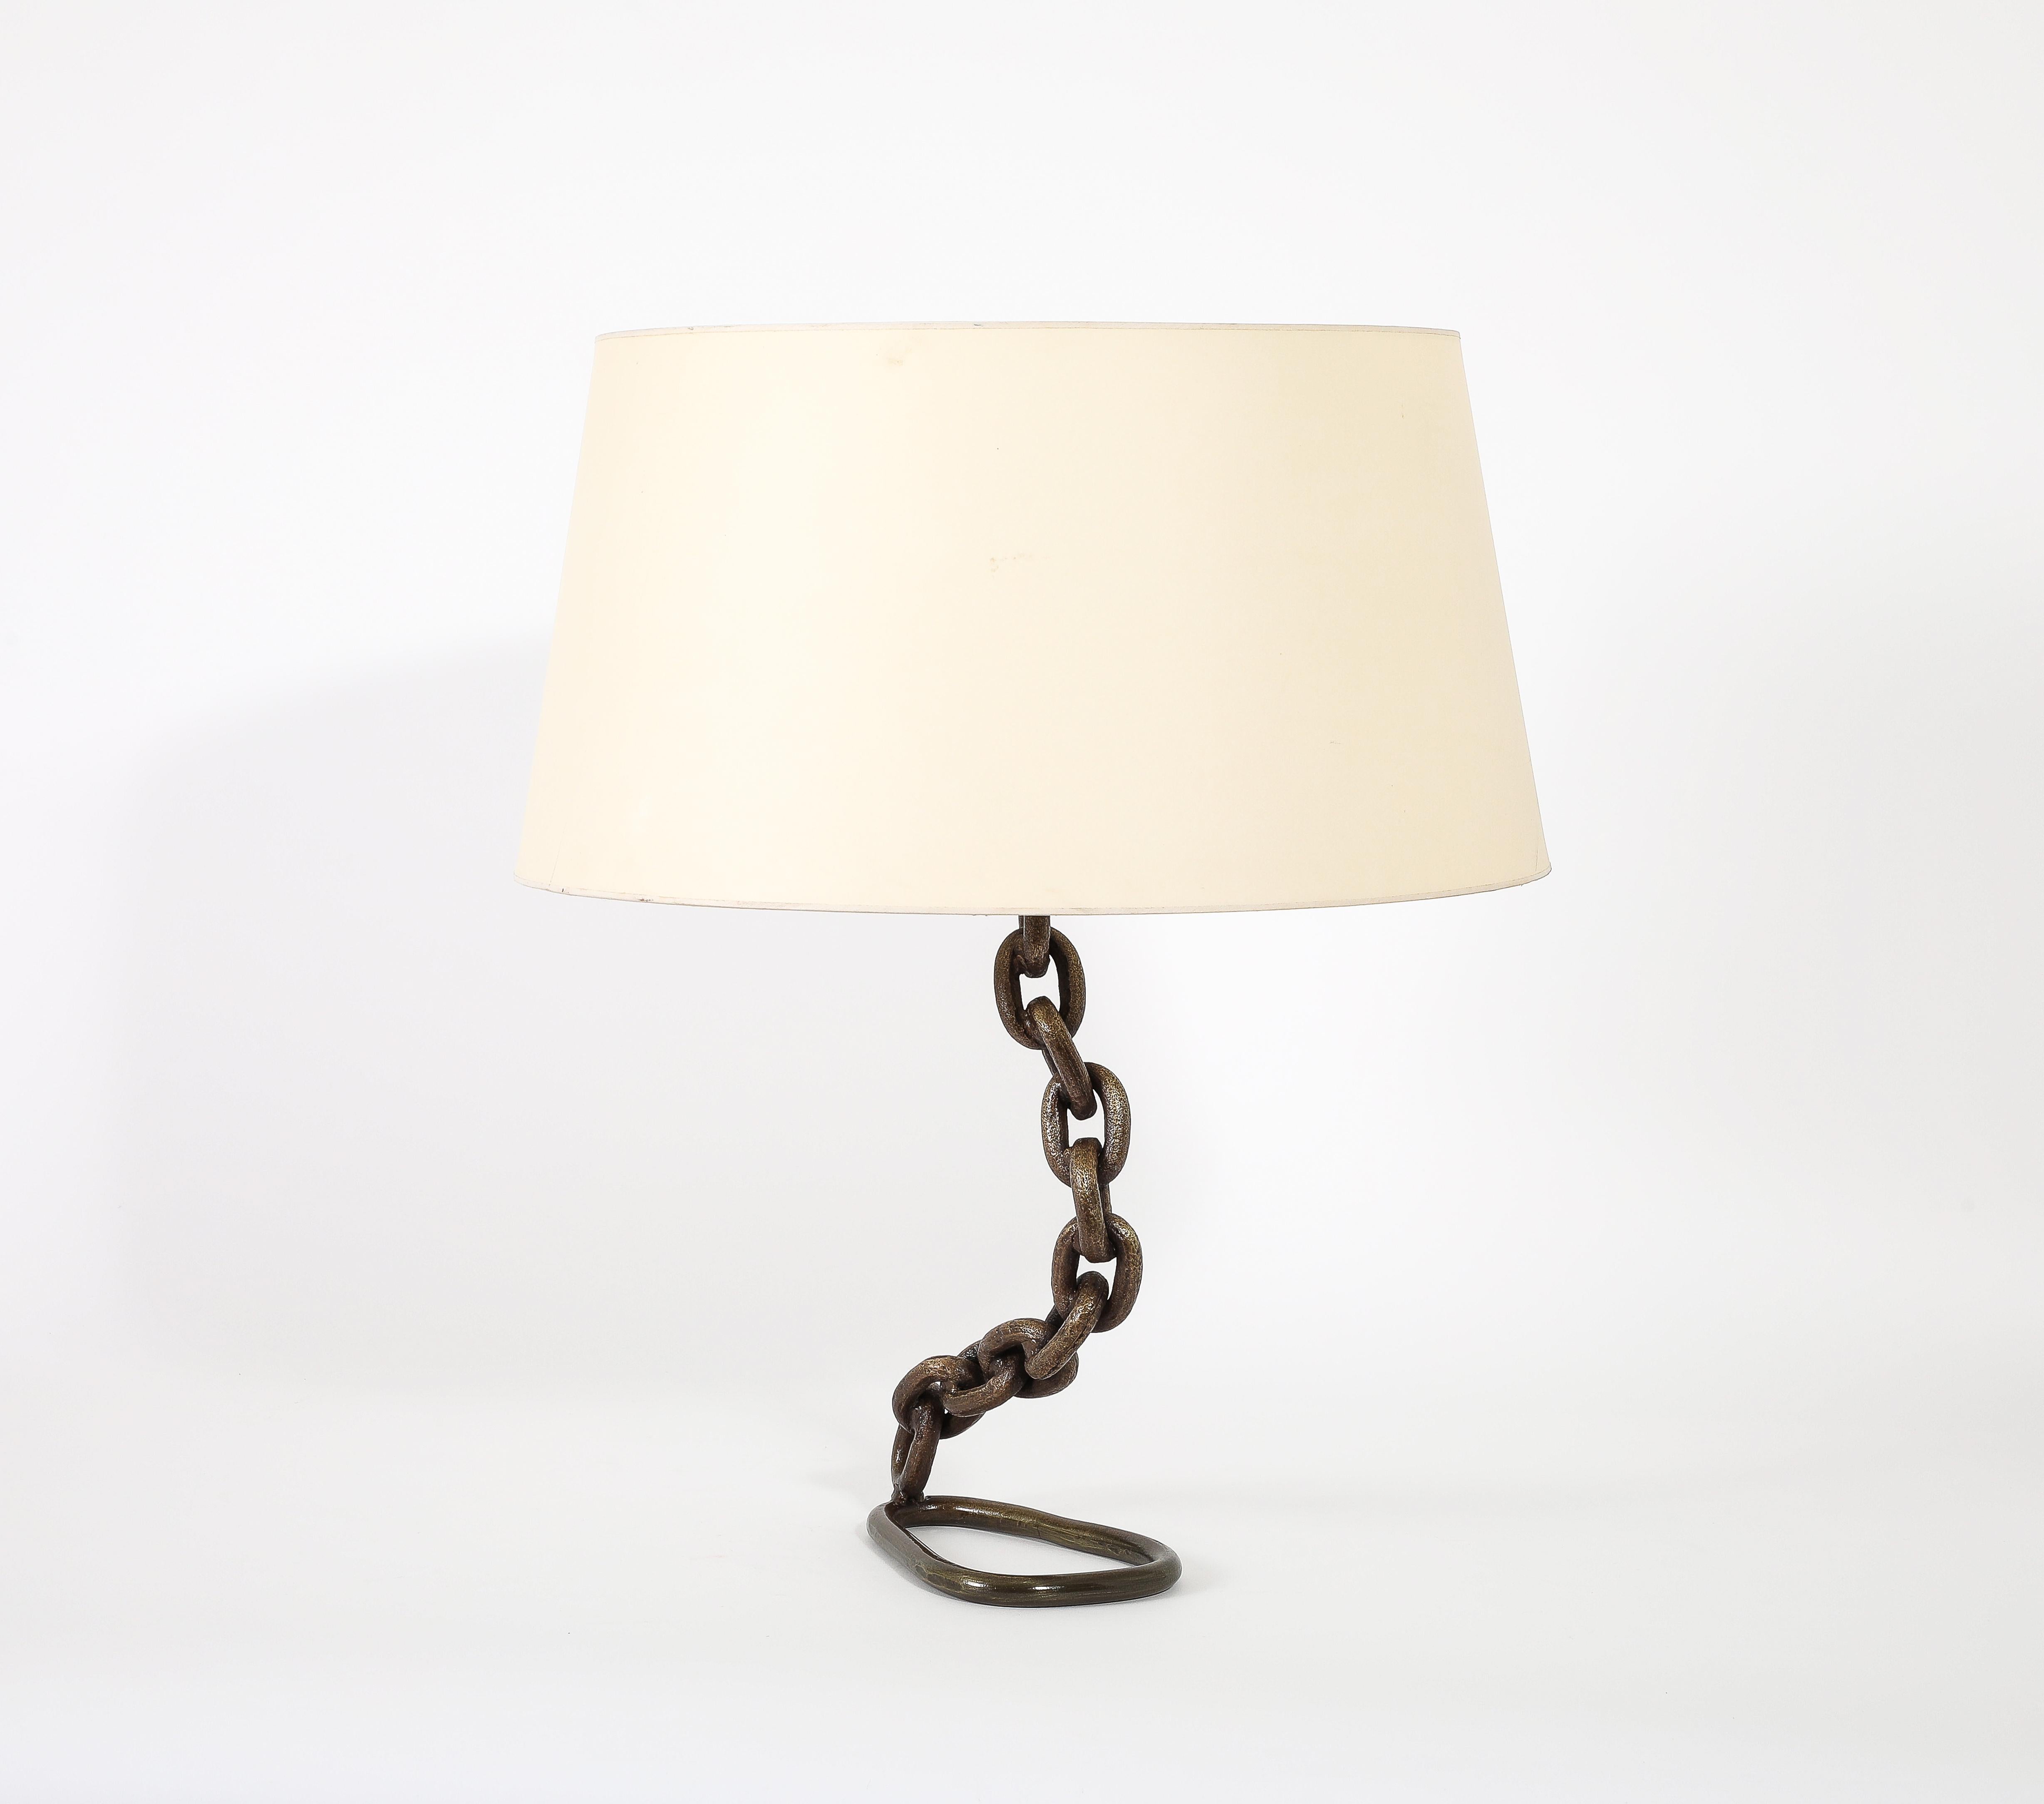 Large Bronze chain table lamp with an asymmetrical base.

Base only 20x8x4

